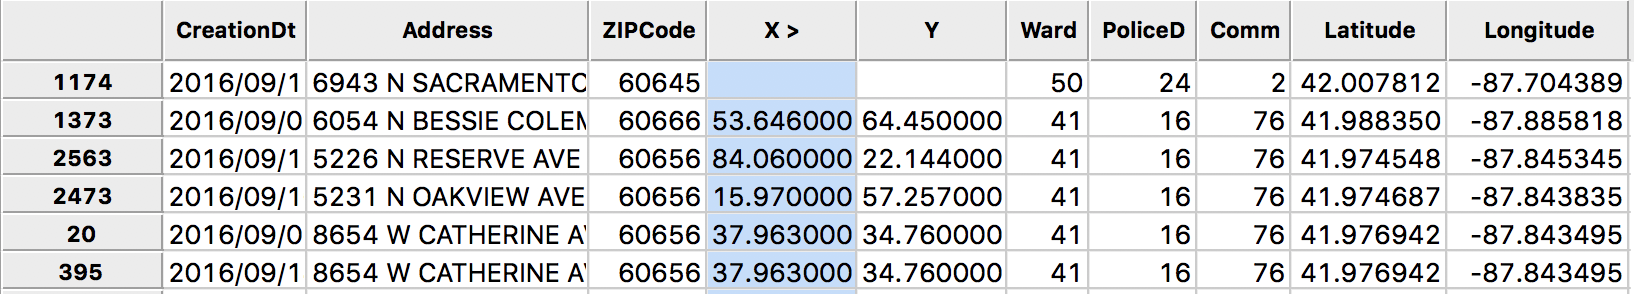 Missing Coordinates in Table